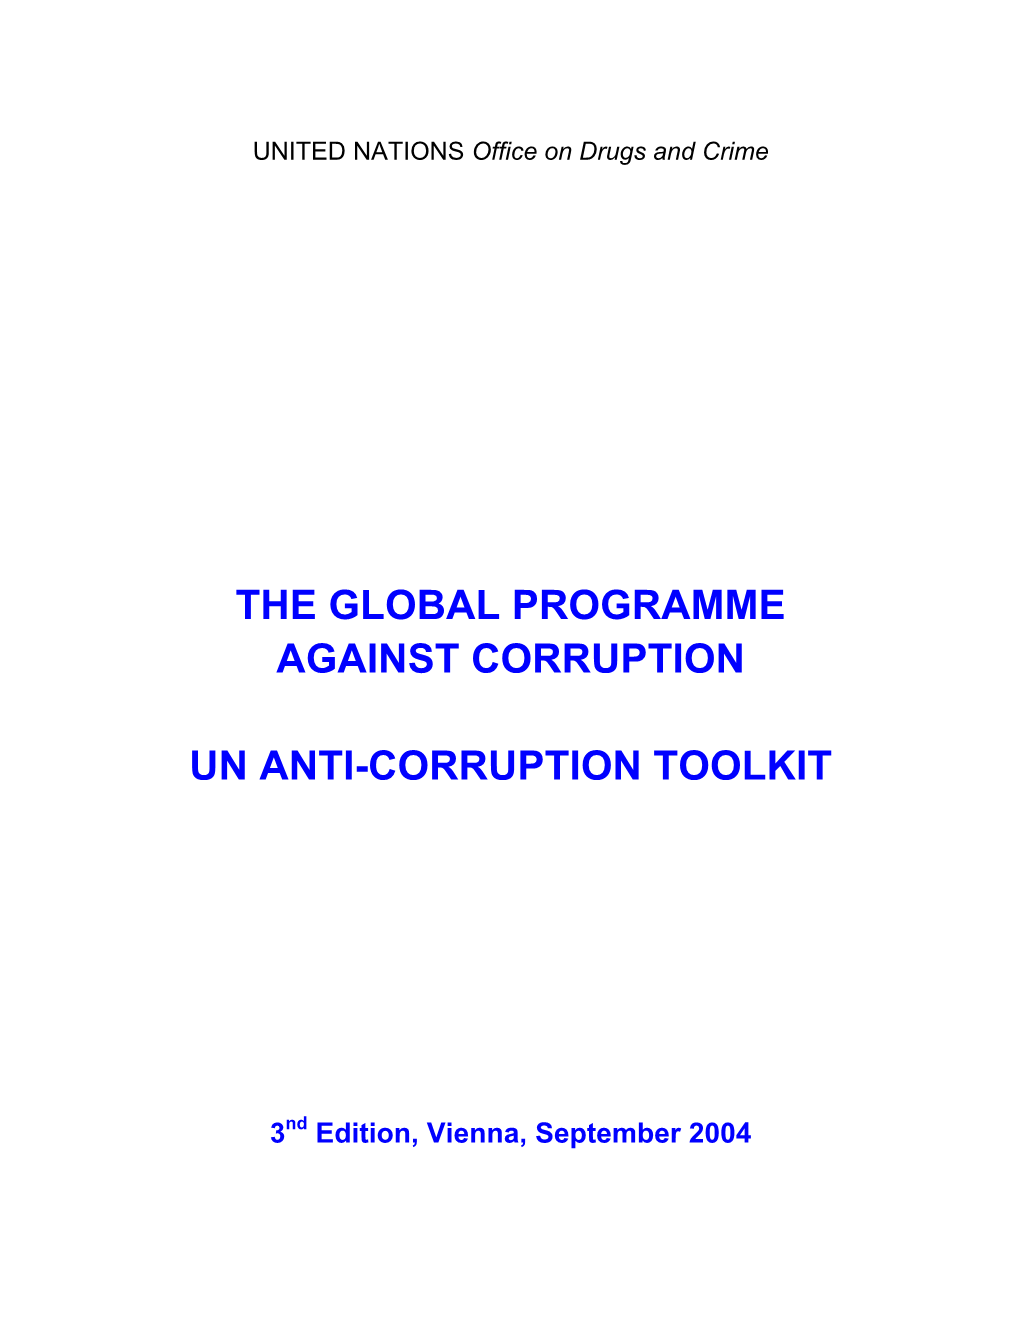 The United Nations Anti-Corruption Toolkit